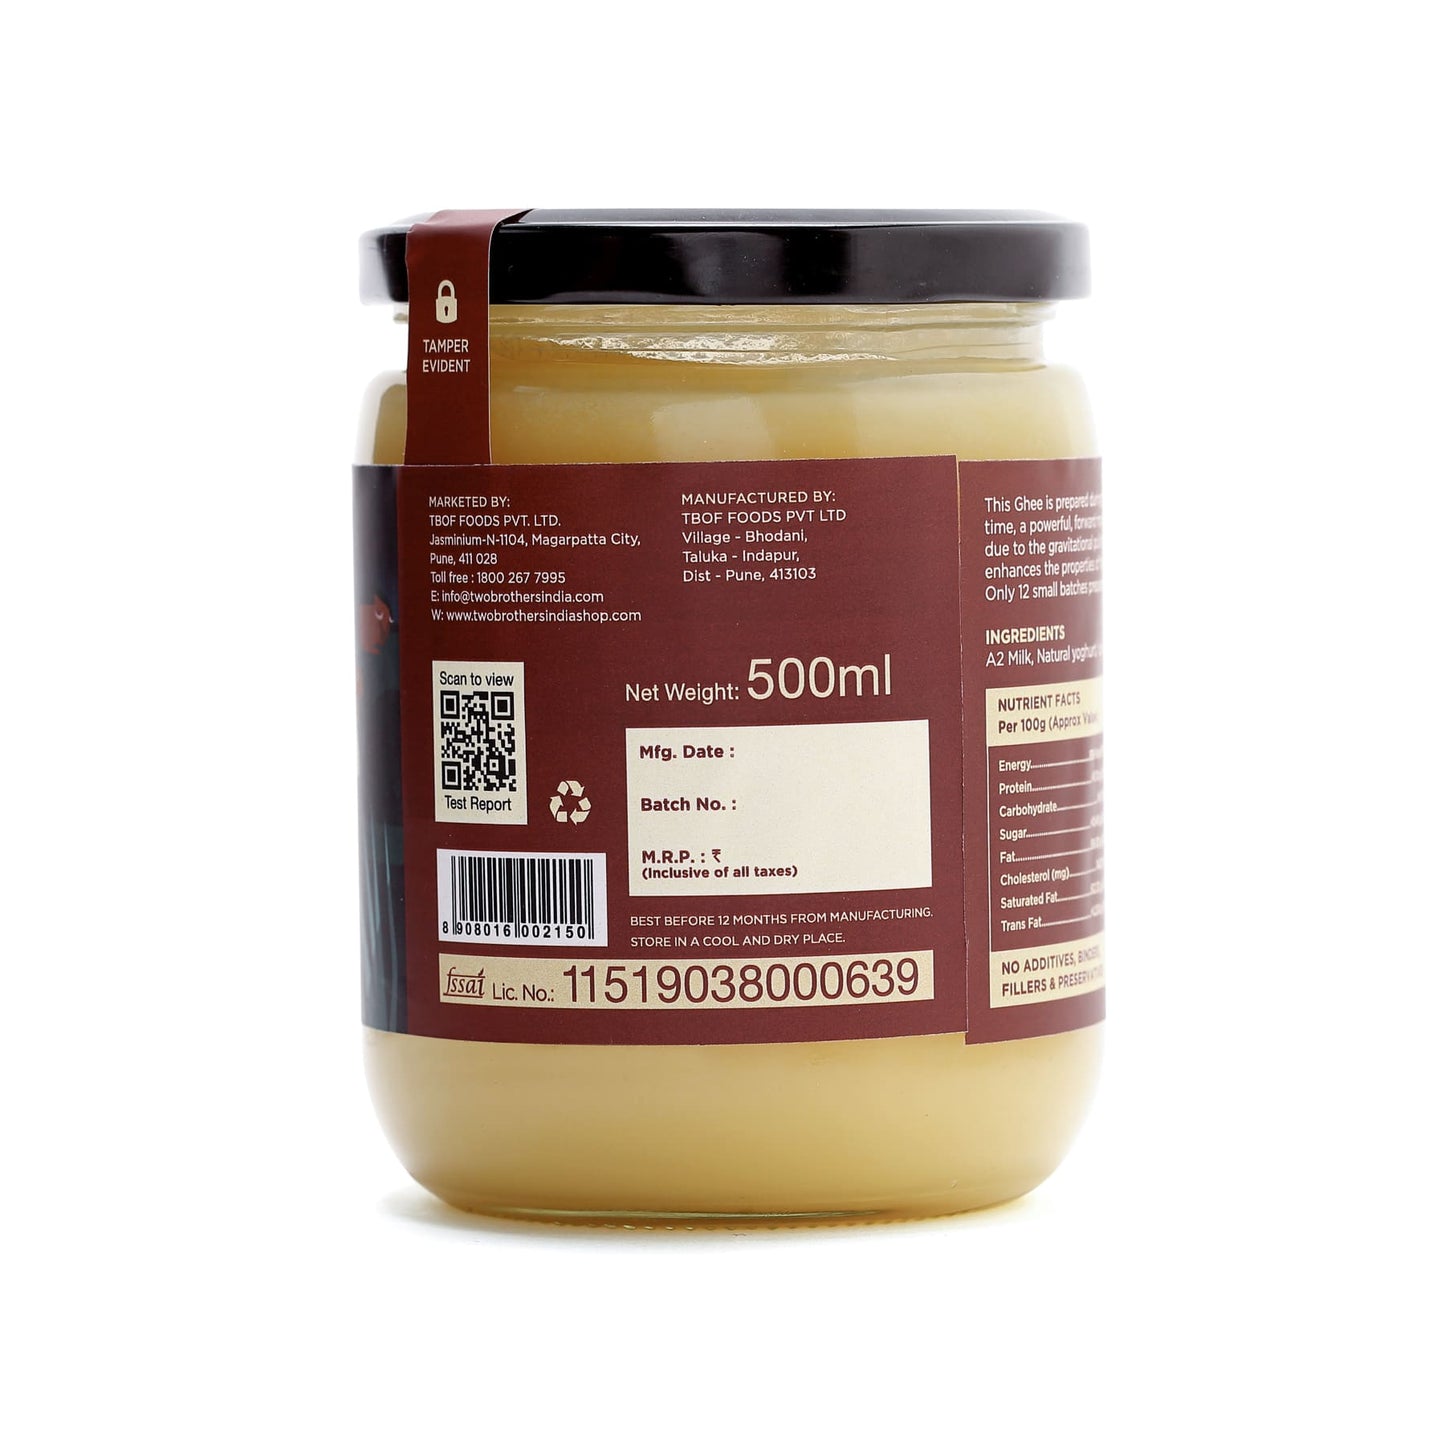 buy two brothers Amorearth Full Moon Ghee online